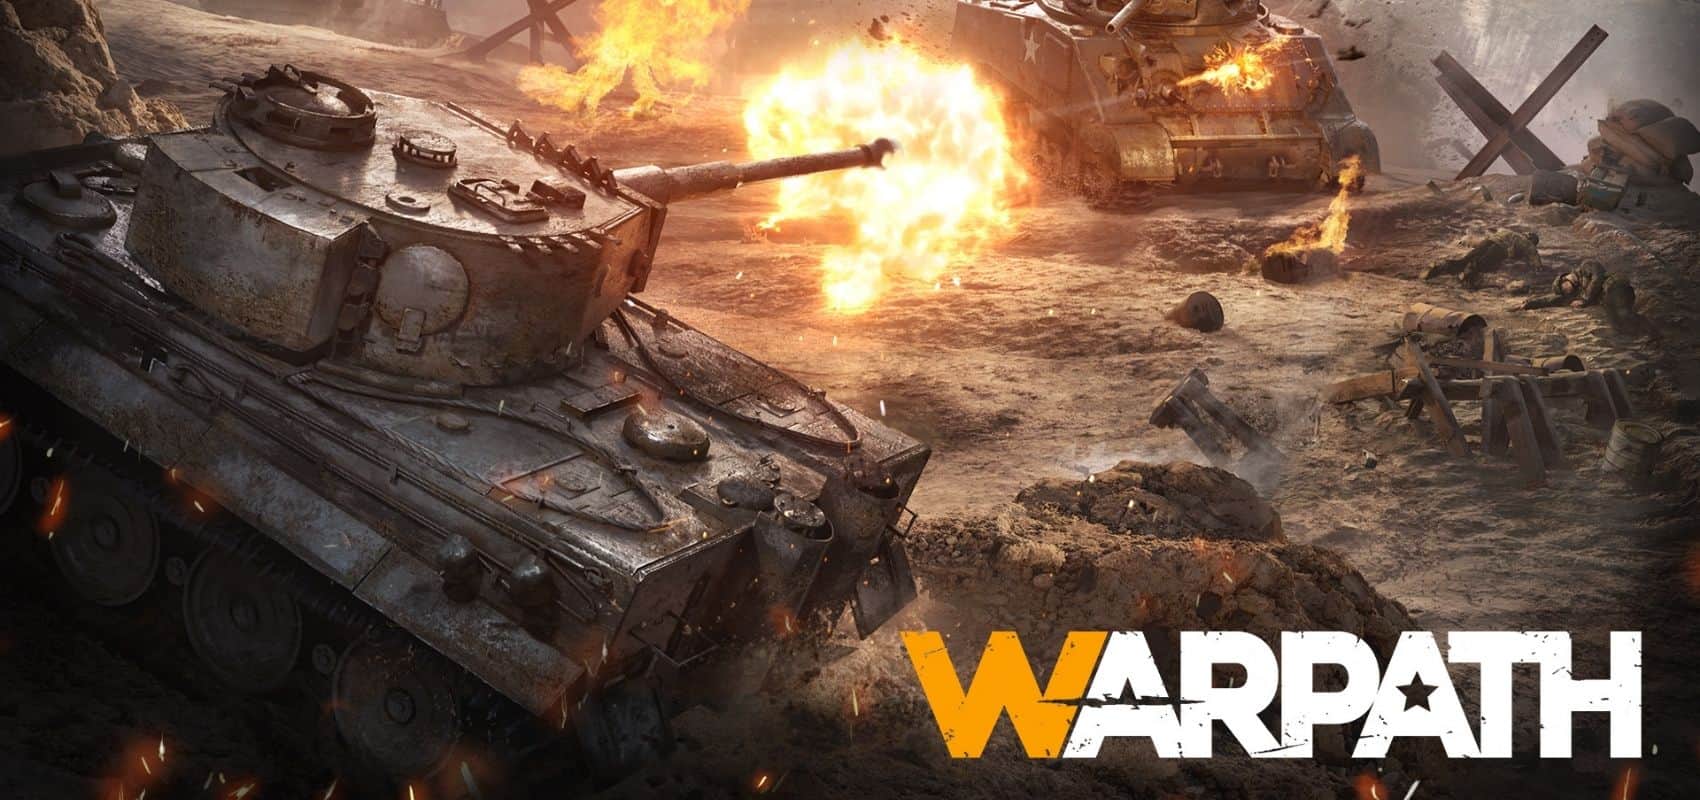 Learn How to Play the Game 'Warpath'